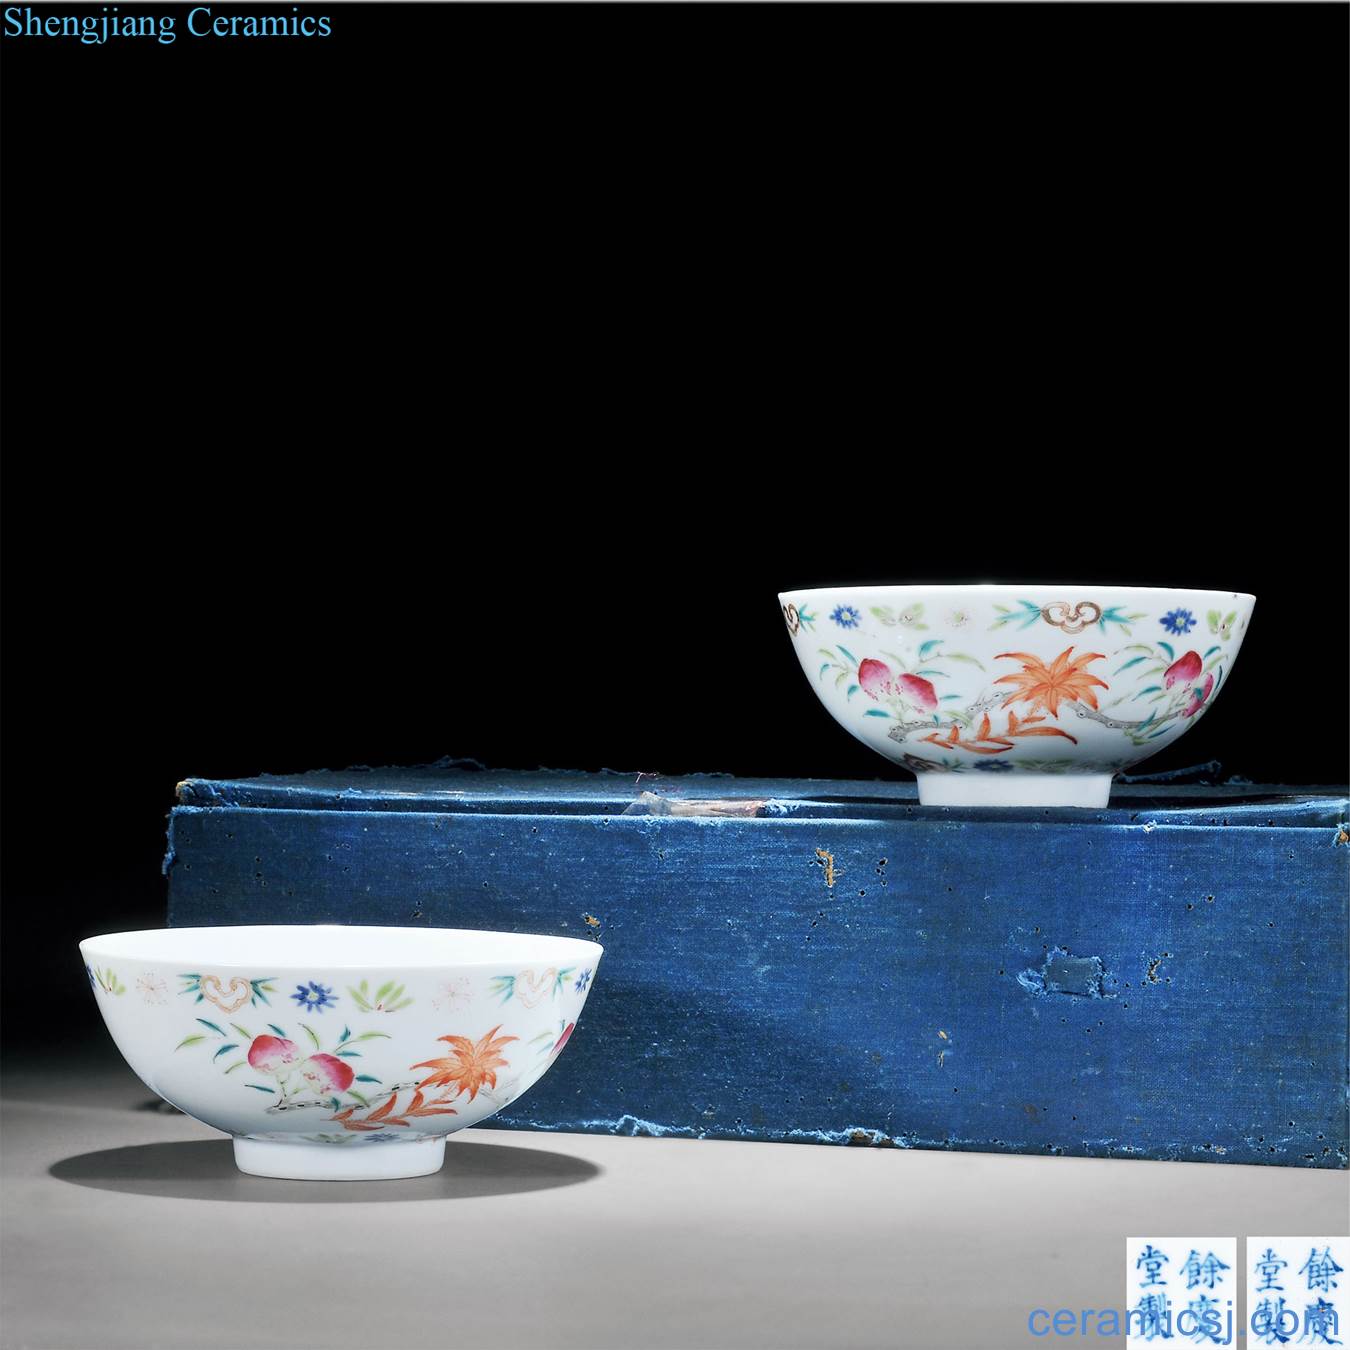 In late qing pastel peach green-splashed bowls (a)